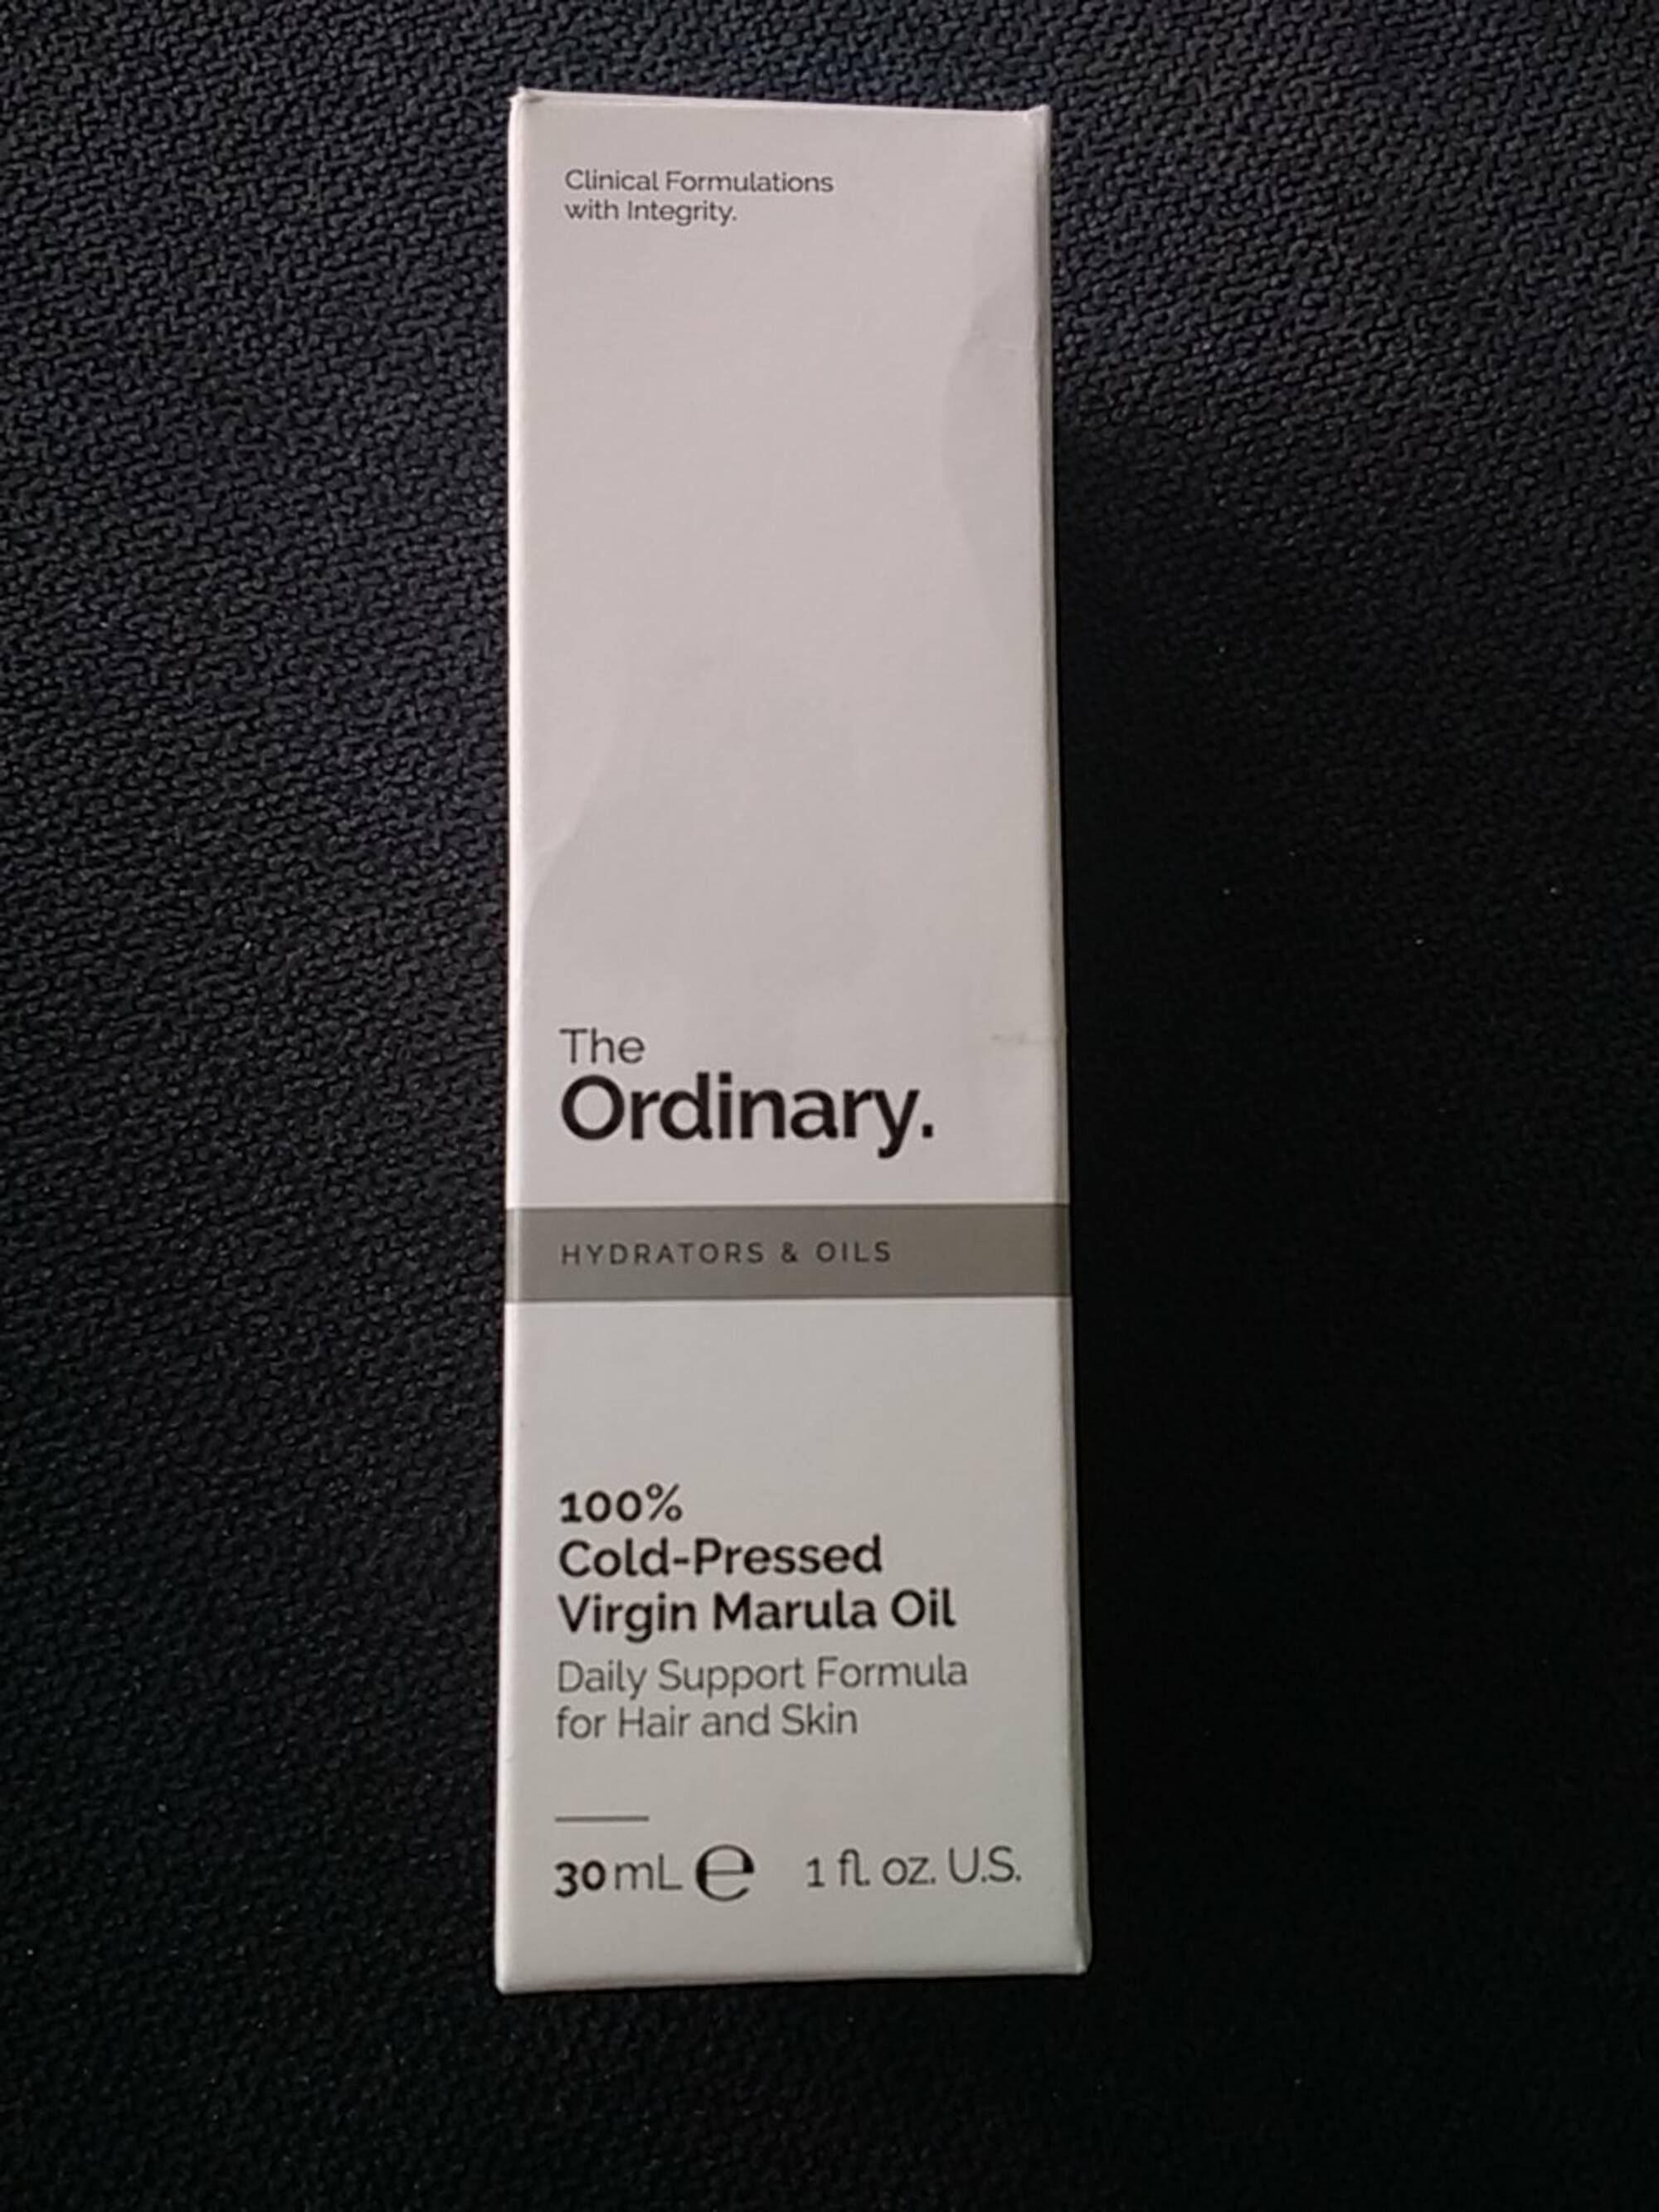 THE ORDINARY - Hydrators & oils for hair and skin